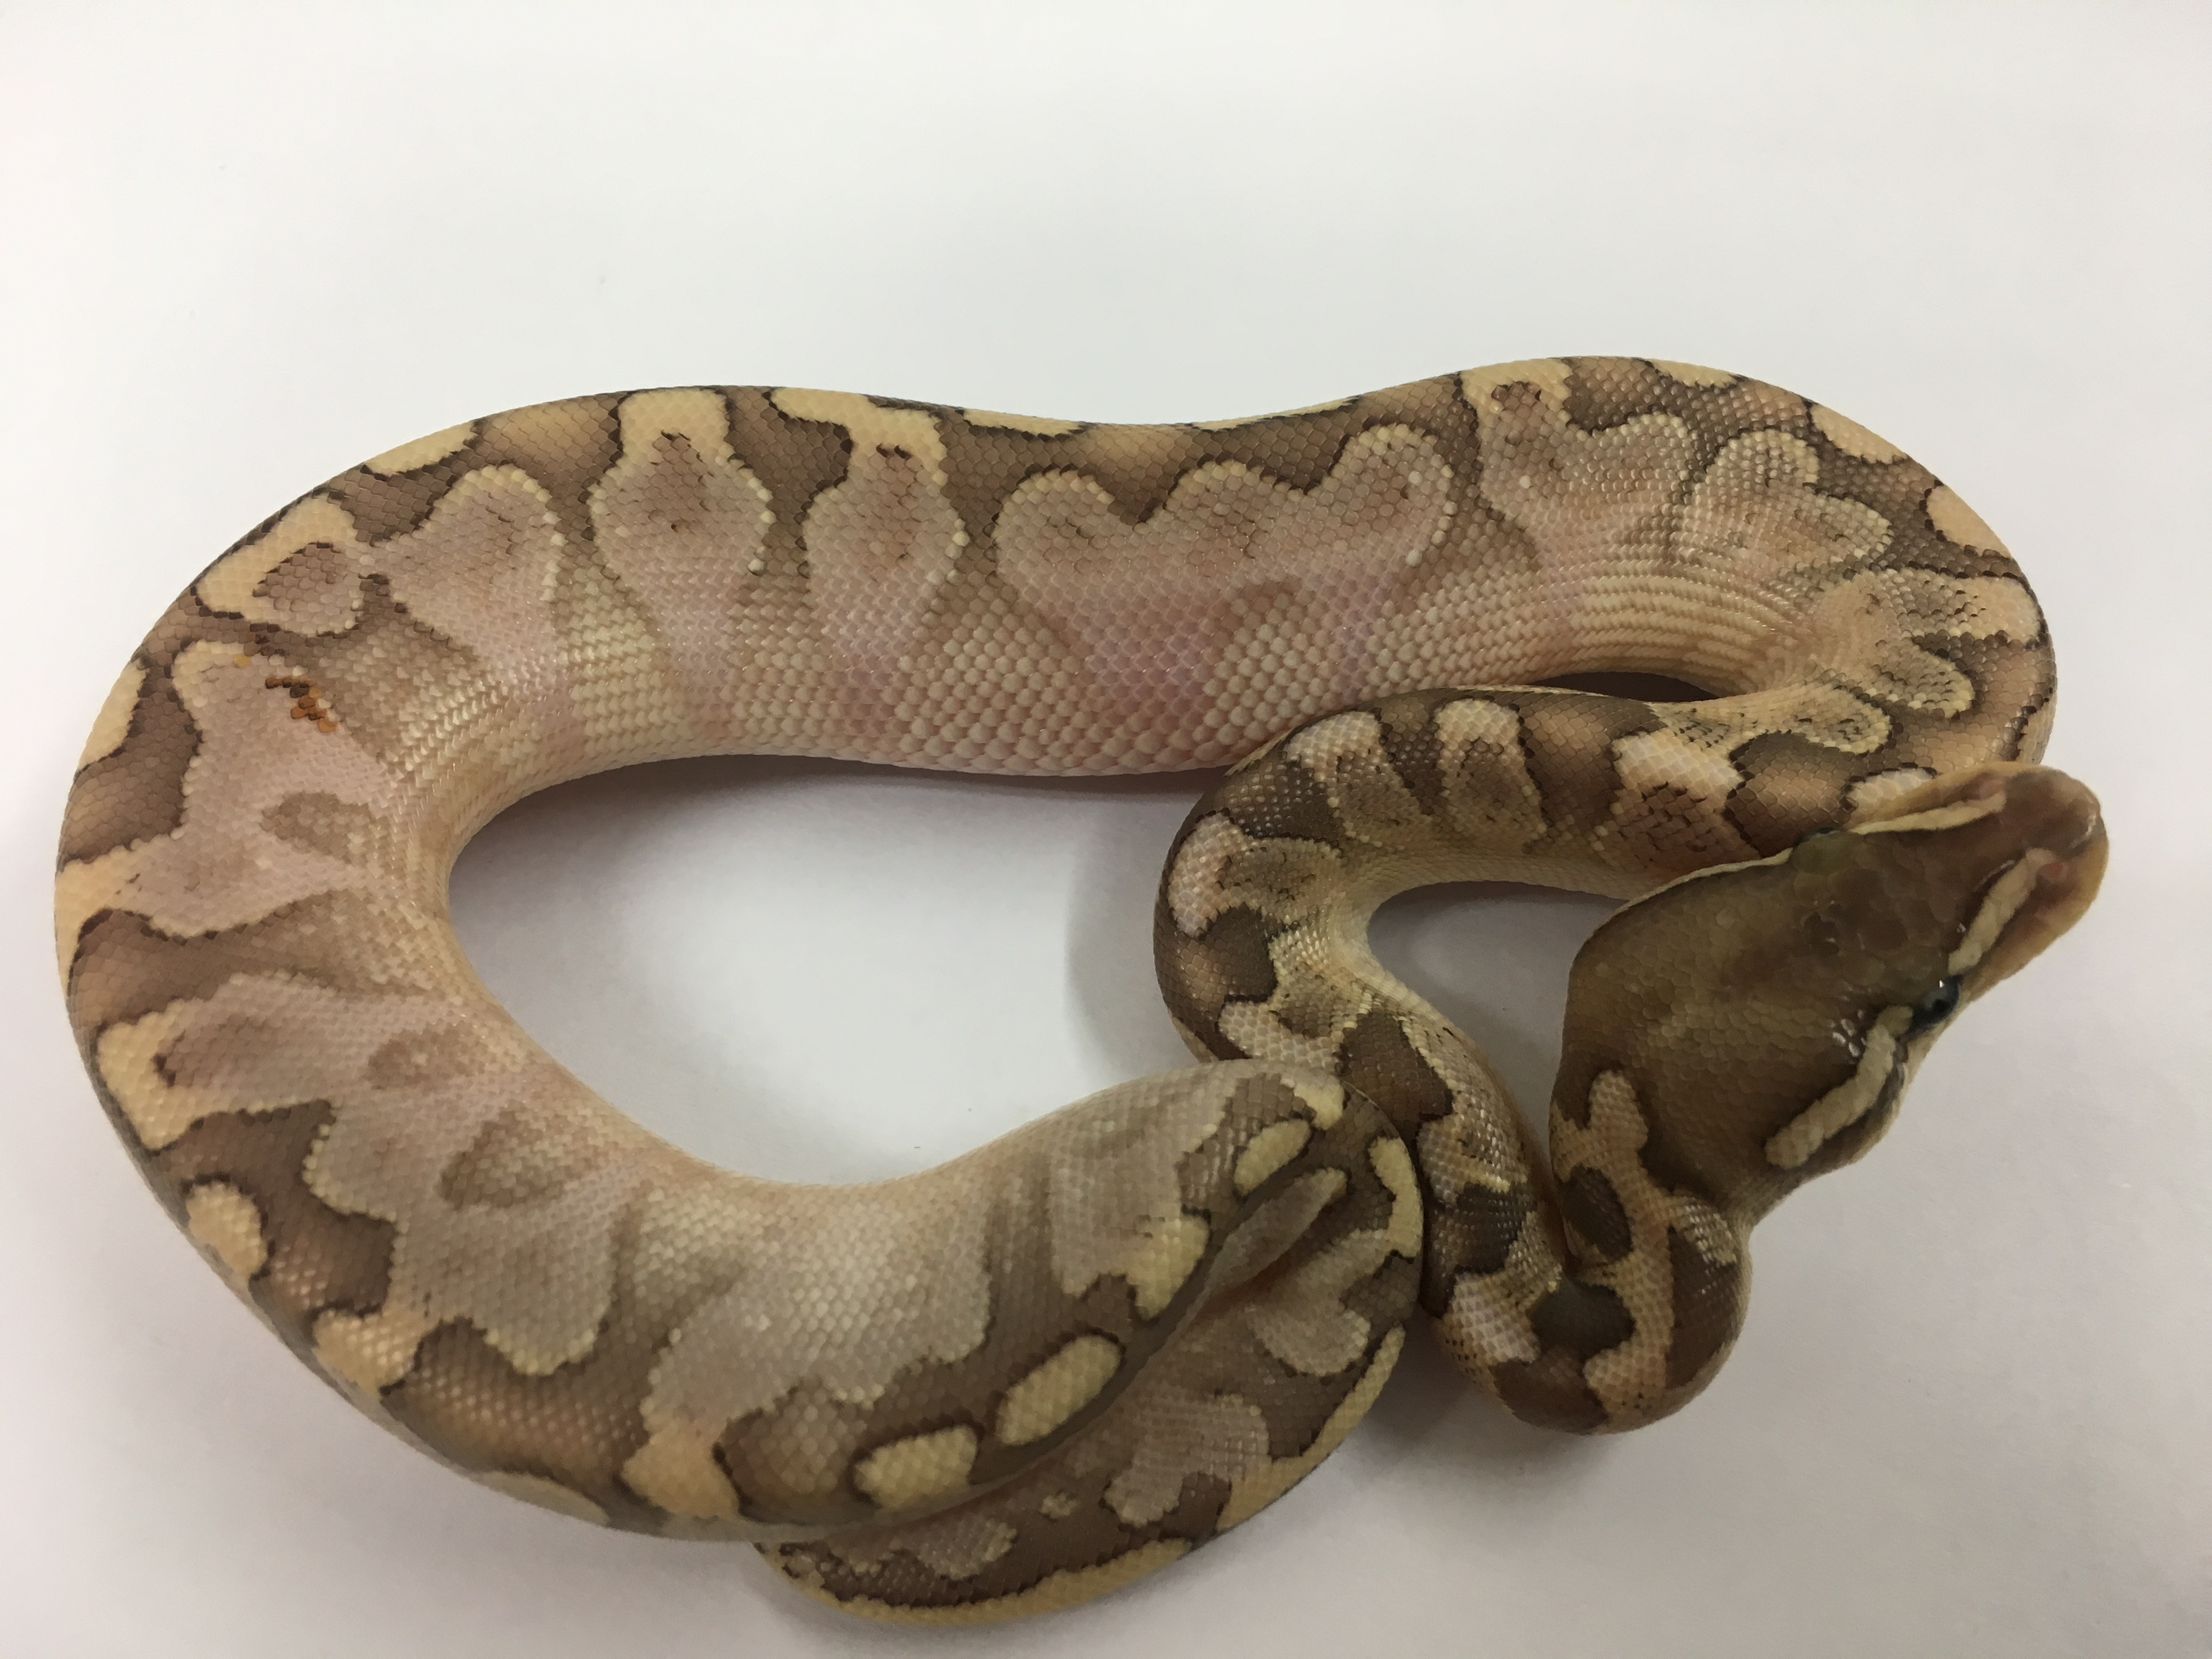 Bamboo Ball Python by America's Finest Balls (#99645)